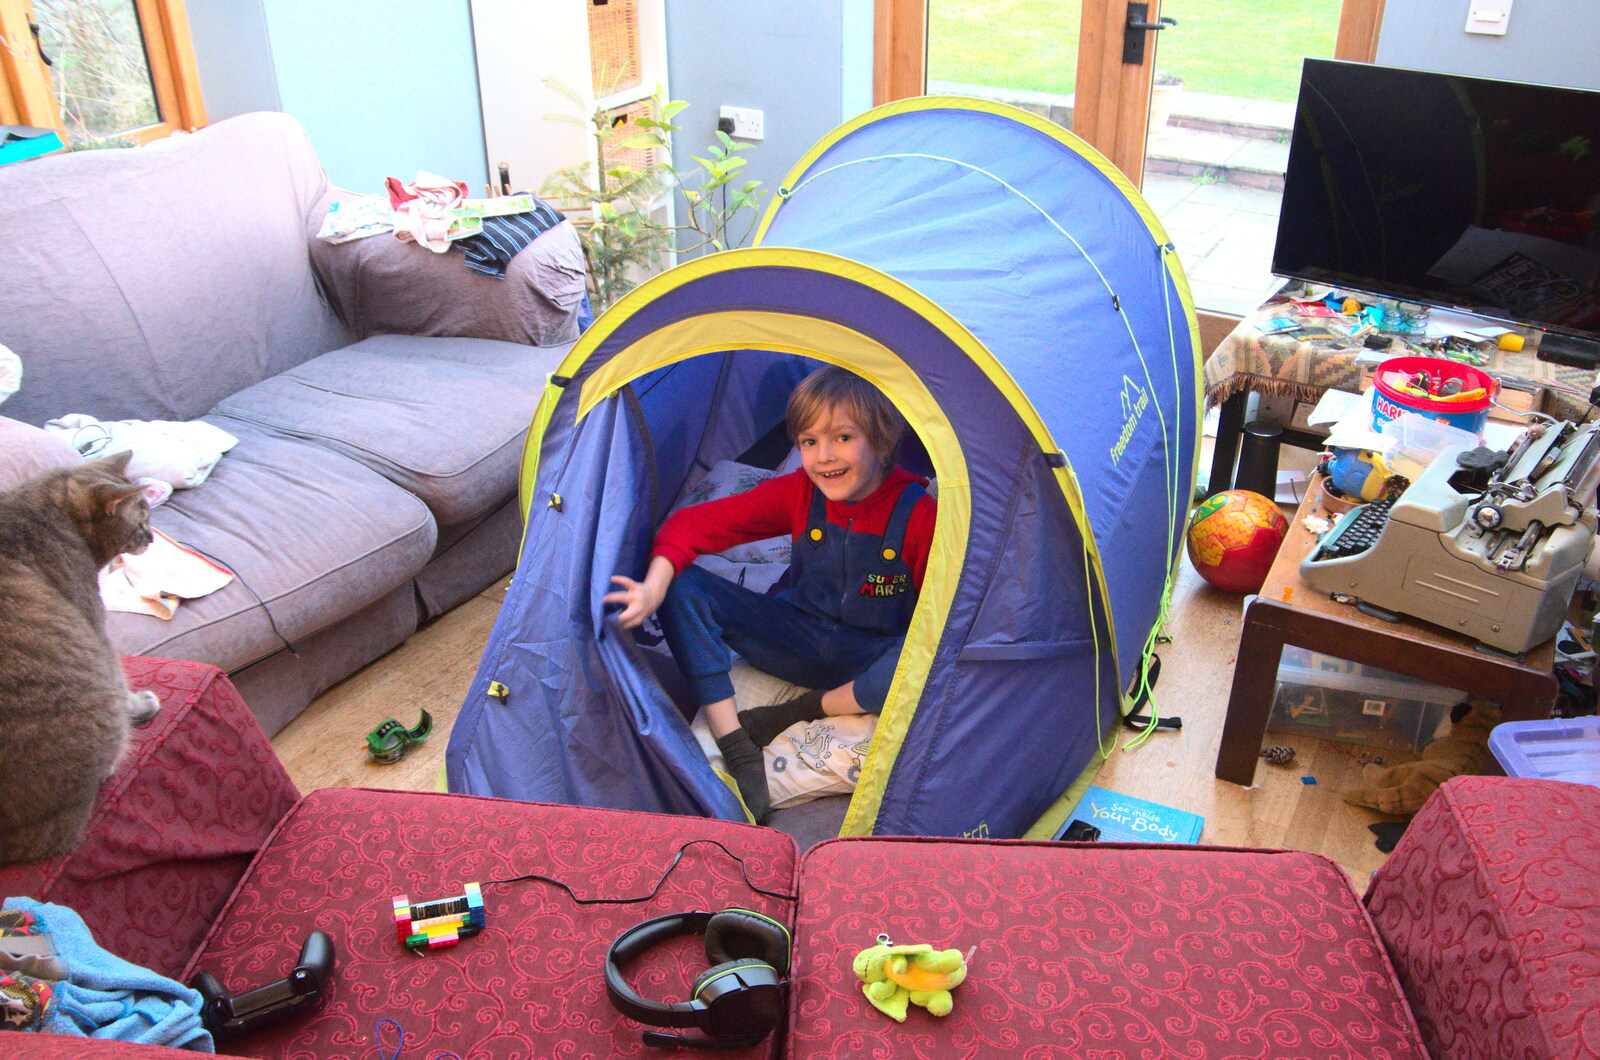 Harry's doing an in-house camp with Beavers from An April Lockdown Miscellany, Eye, Suffolk - 10th April 2020